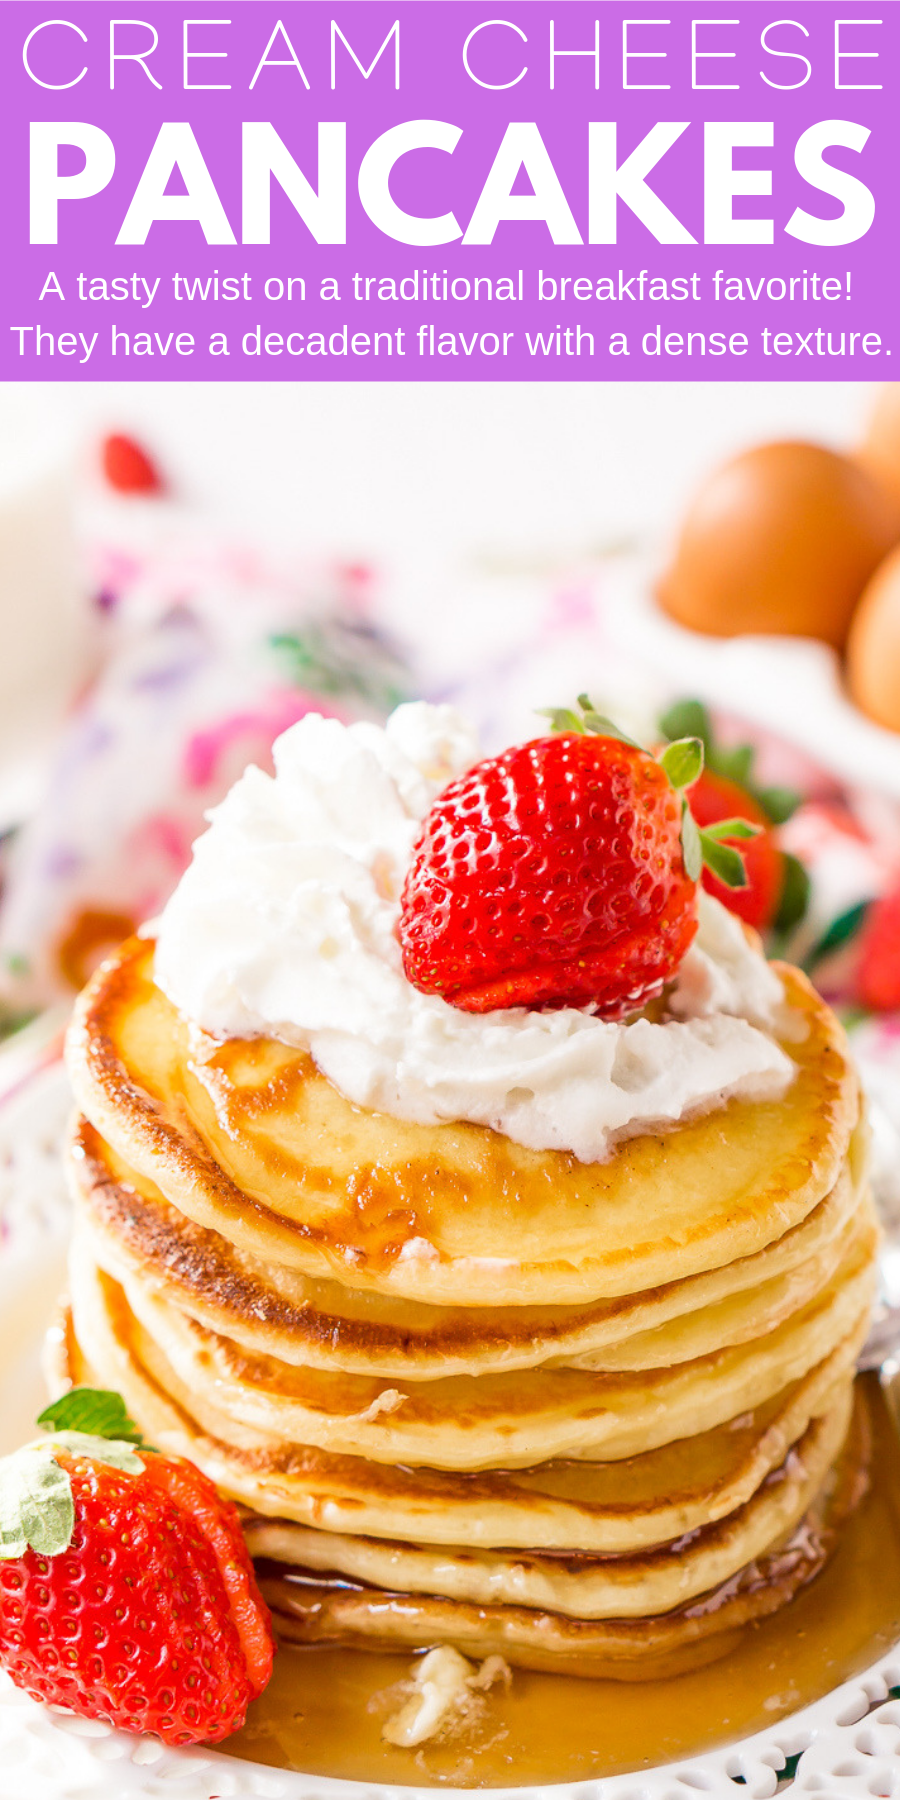 Cream Cheese Pancakes put a tasty twist on a traditional breakfast favorite! They have a decadent flavor with a dense yet fluffy texture for a dish that the whole family will love.